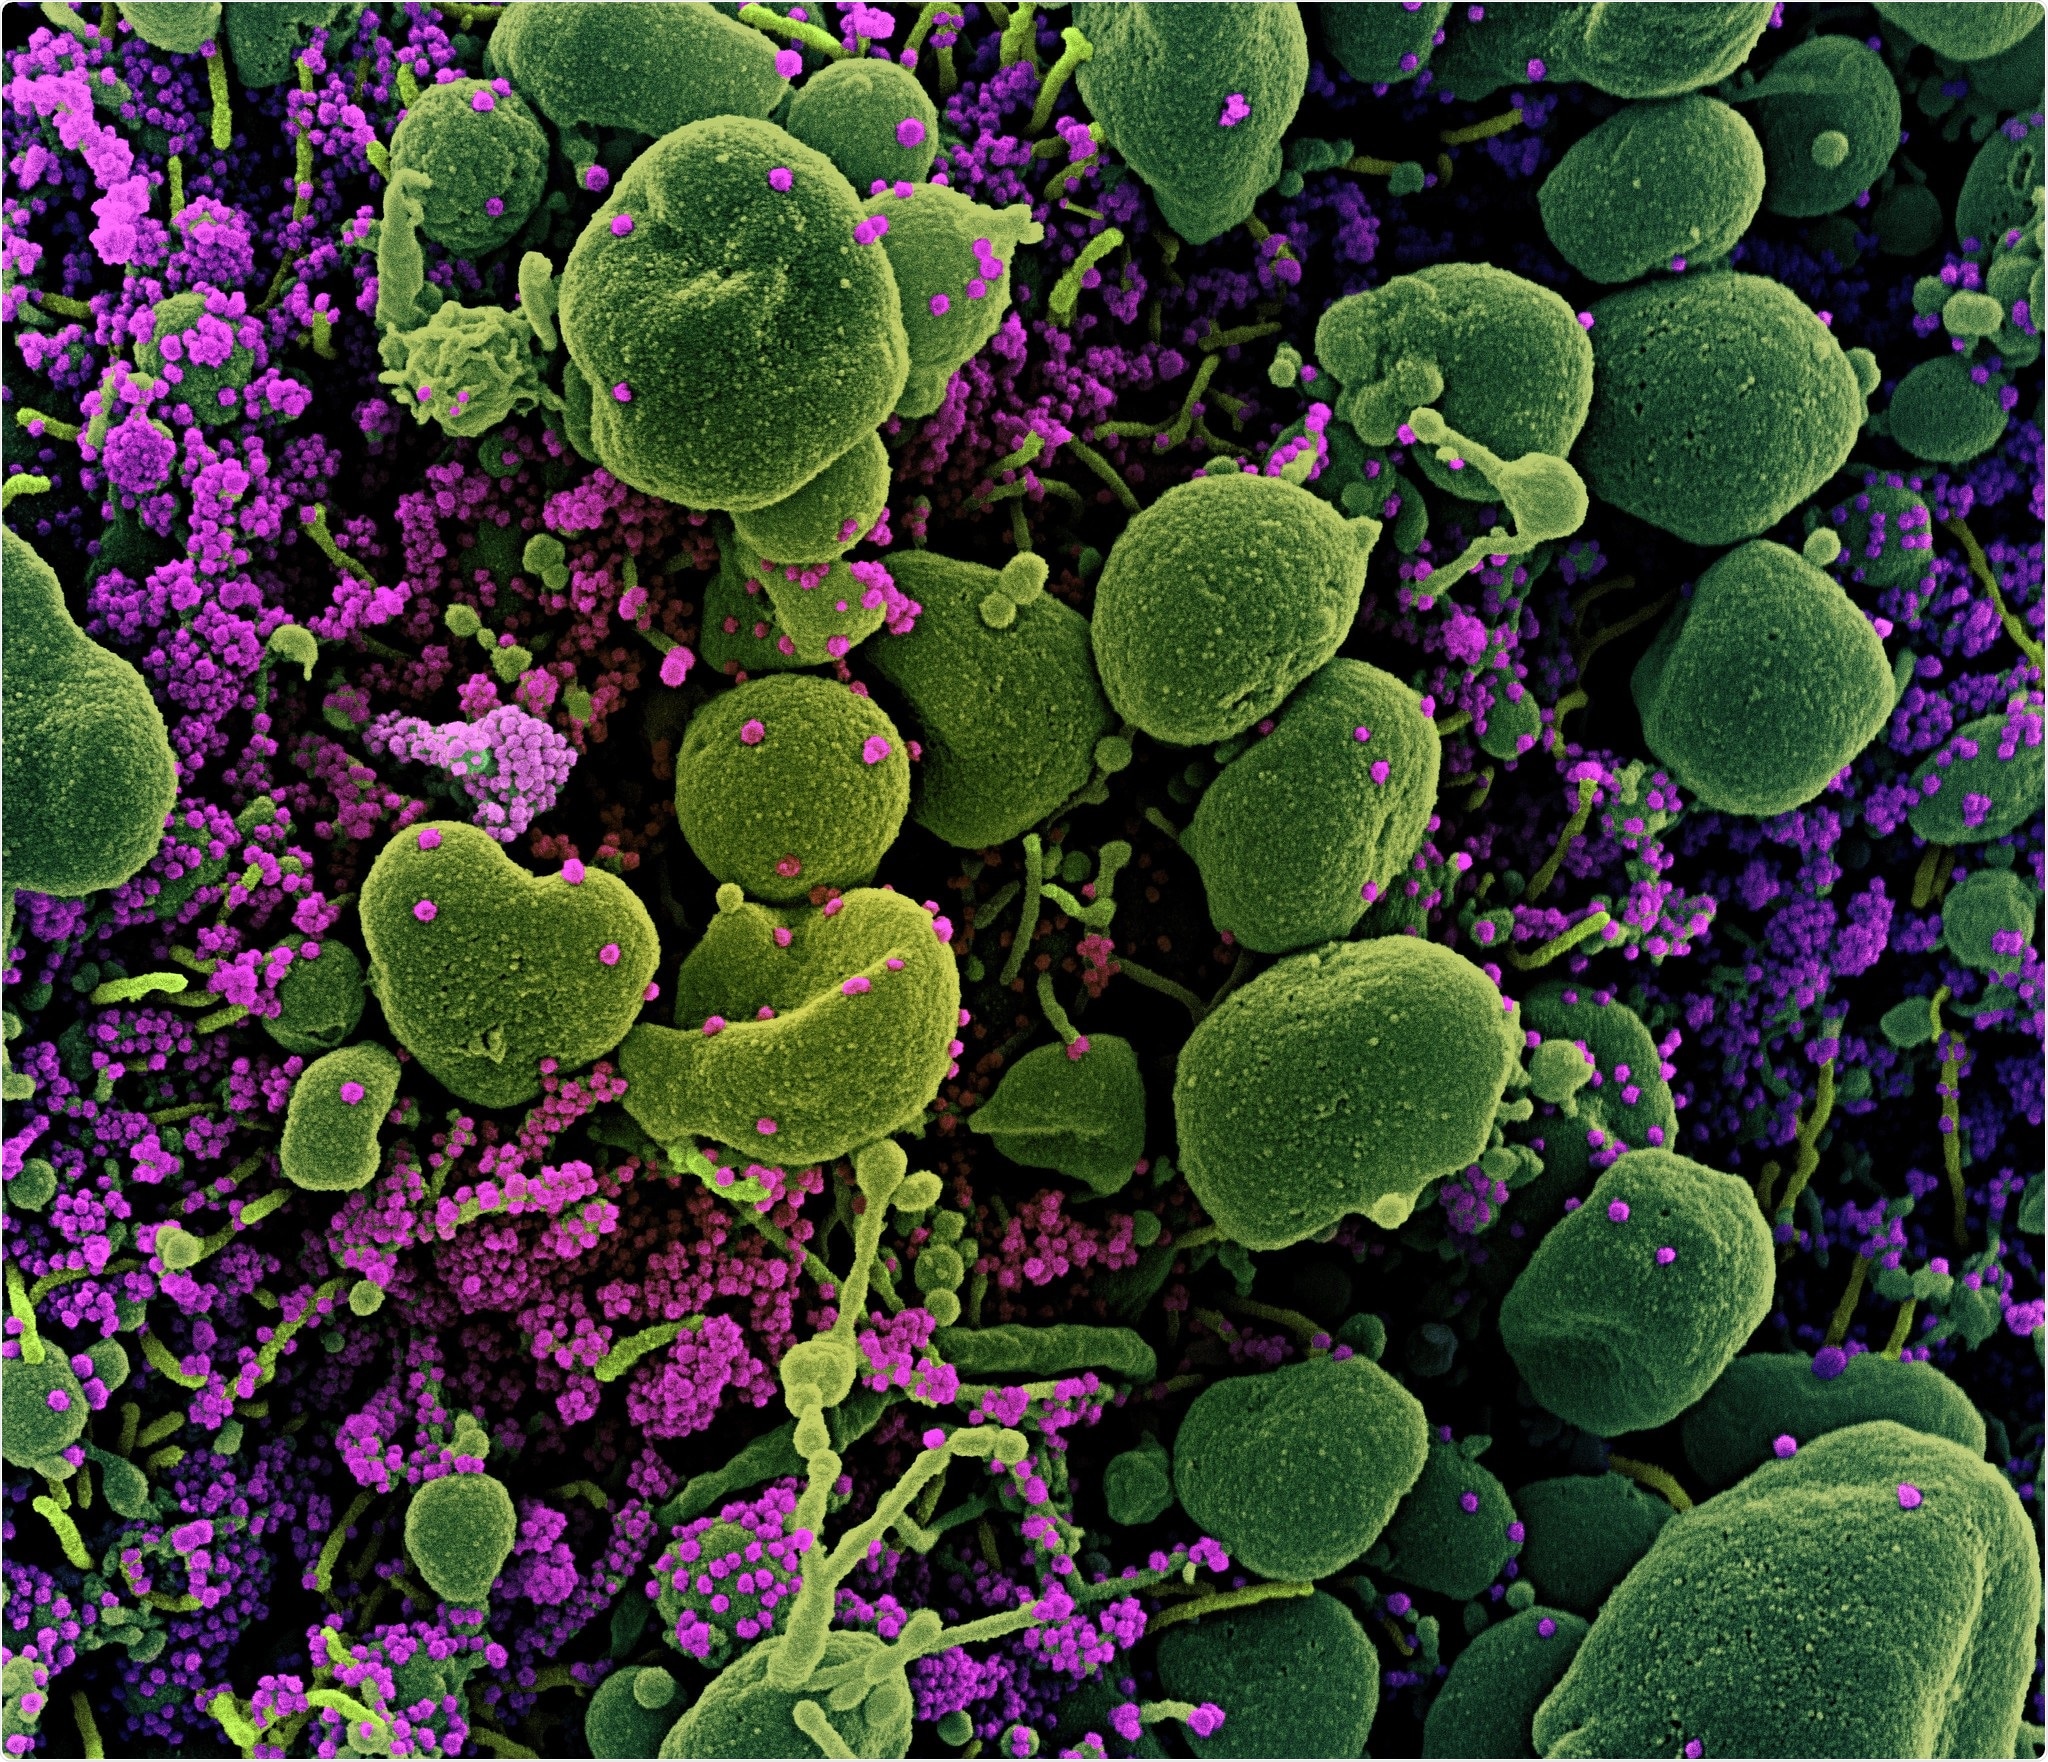 Novel Coronavirus SARS-CoV-2 Colorized scanning electron micrograph of an apoptotic cell (green) heavily infected with SARS-COV-2 virus particles (purple), isolated from a patient sample. Image captured at the NIAID Integrated Research Facility (IRF) in Fort Detrick, Maryland. Credit: NIAID